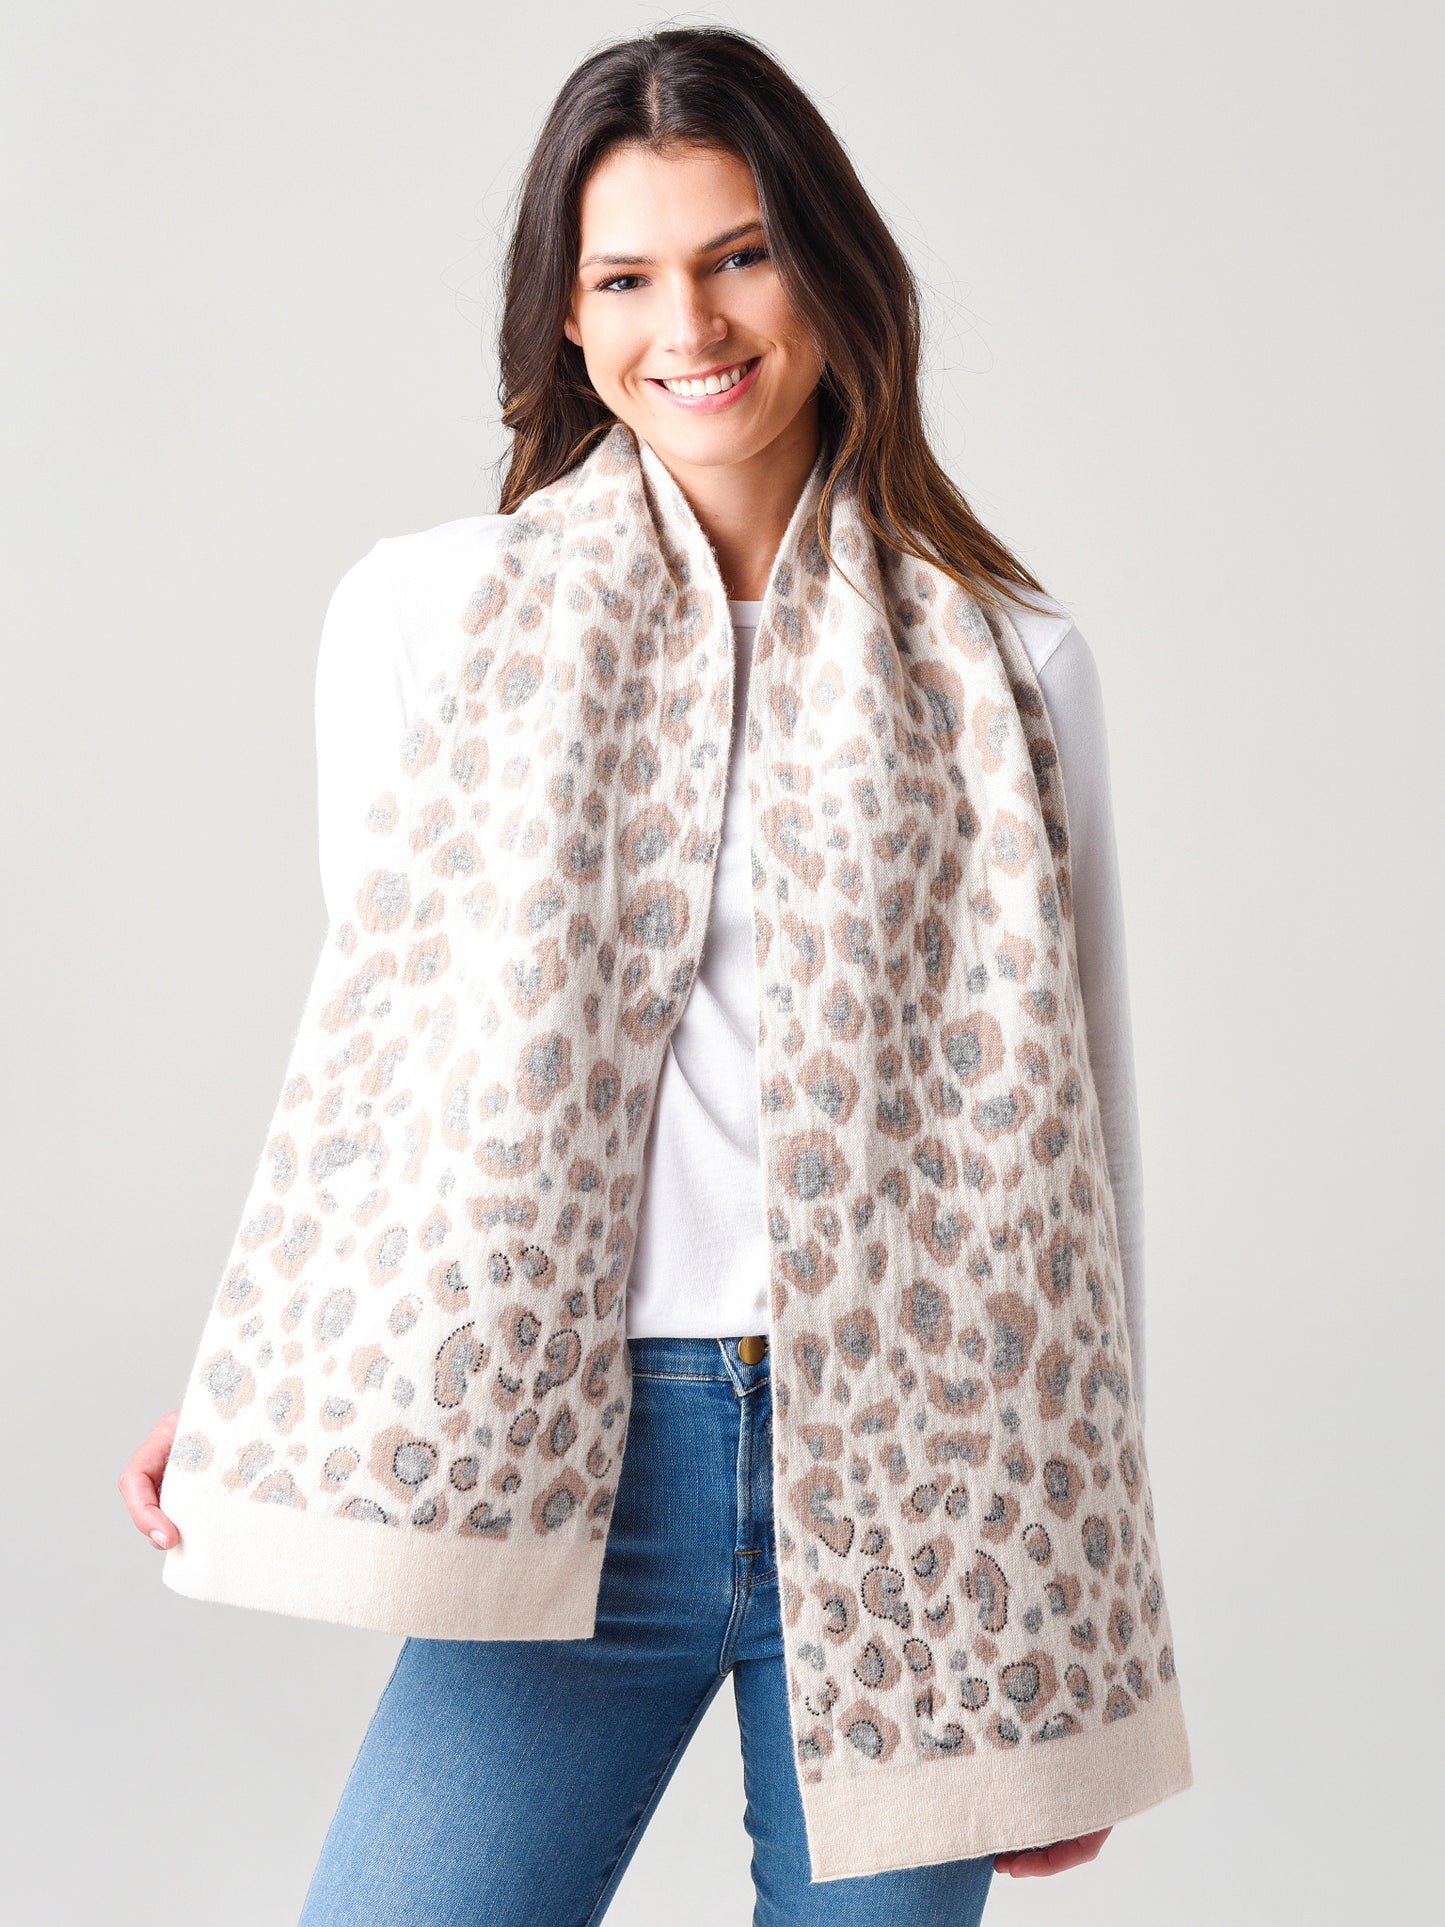 Mitchie's Matchings Women's Animal Print Scarf With Crystals